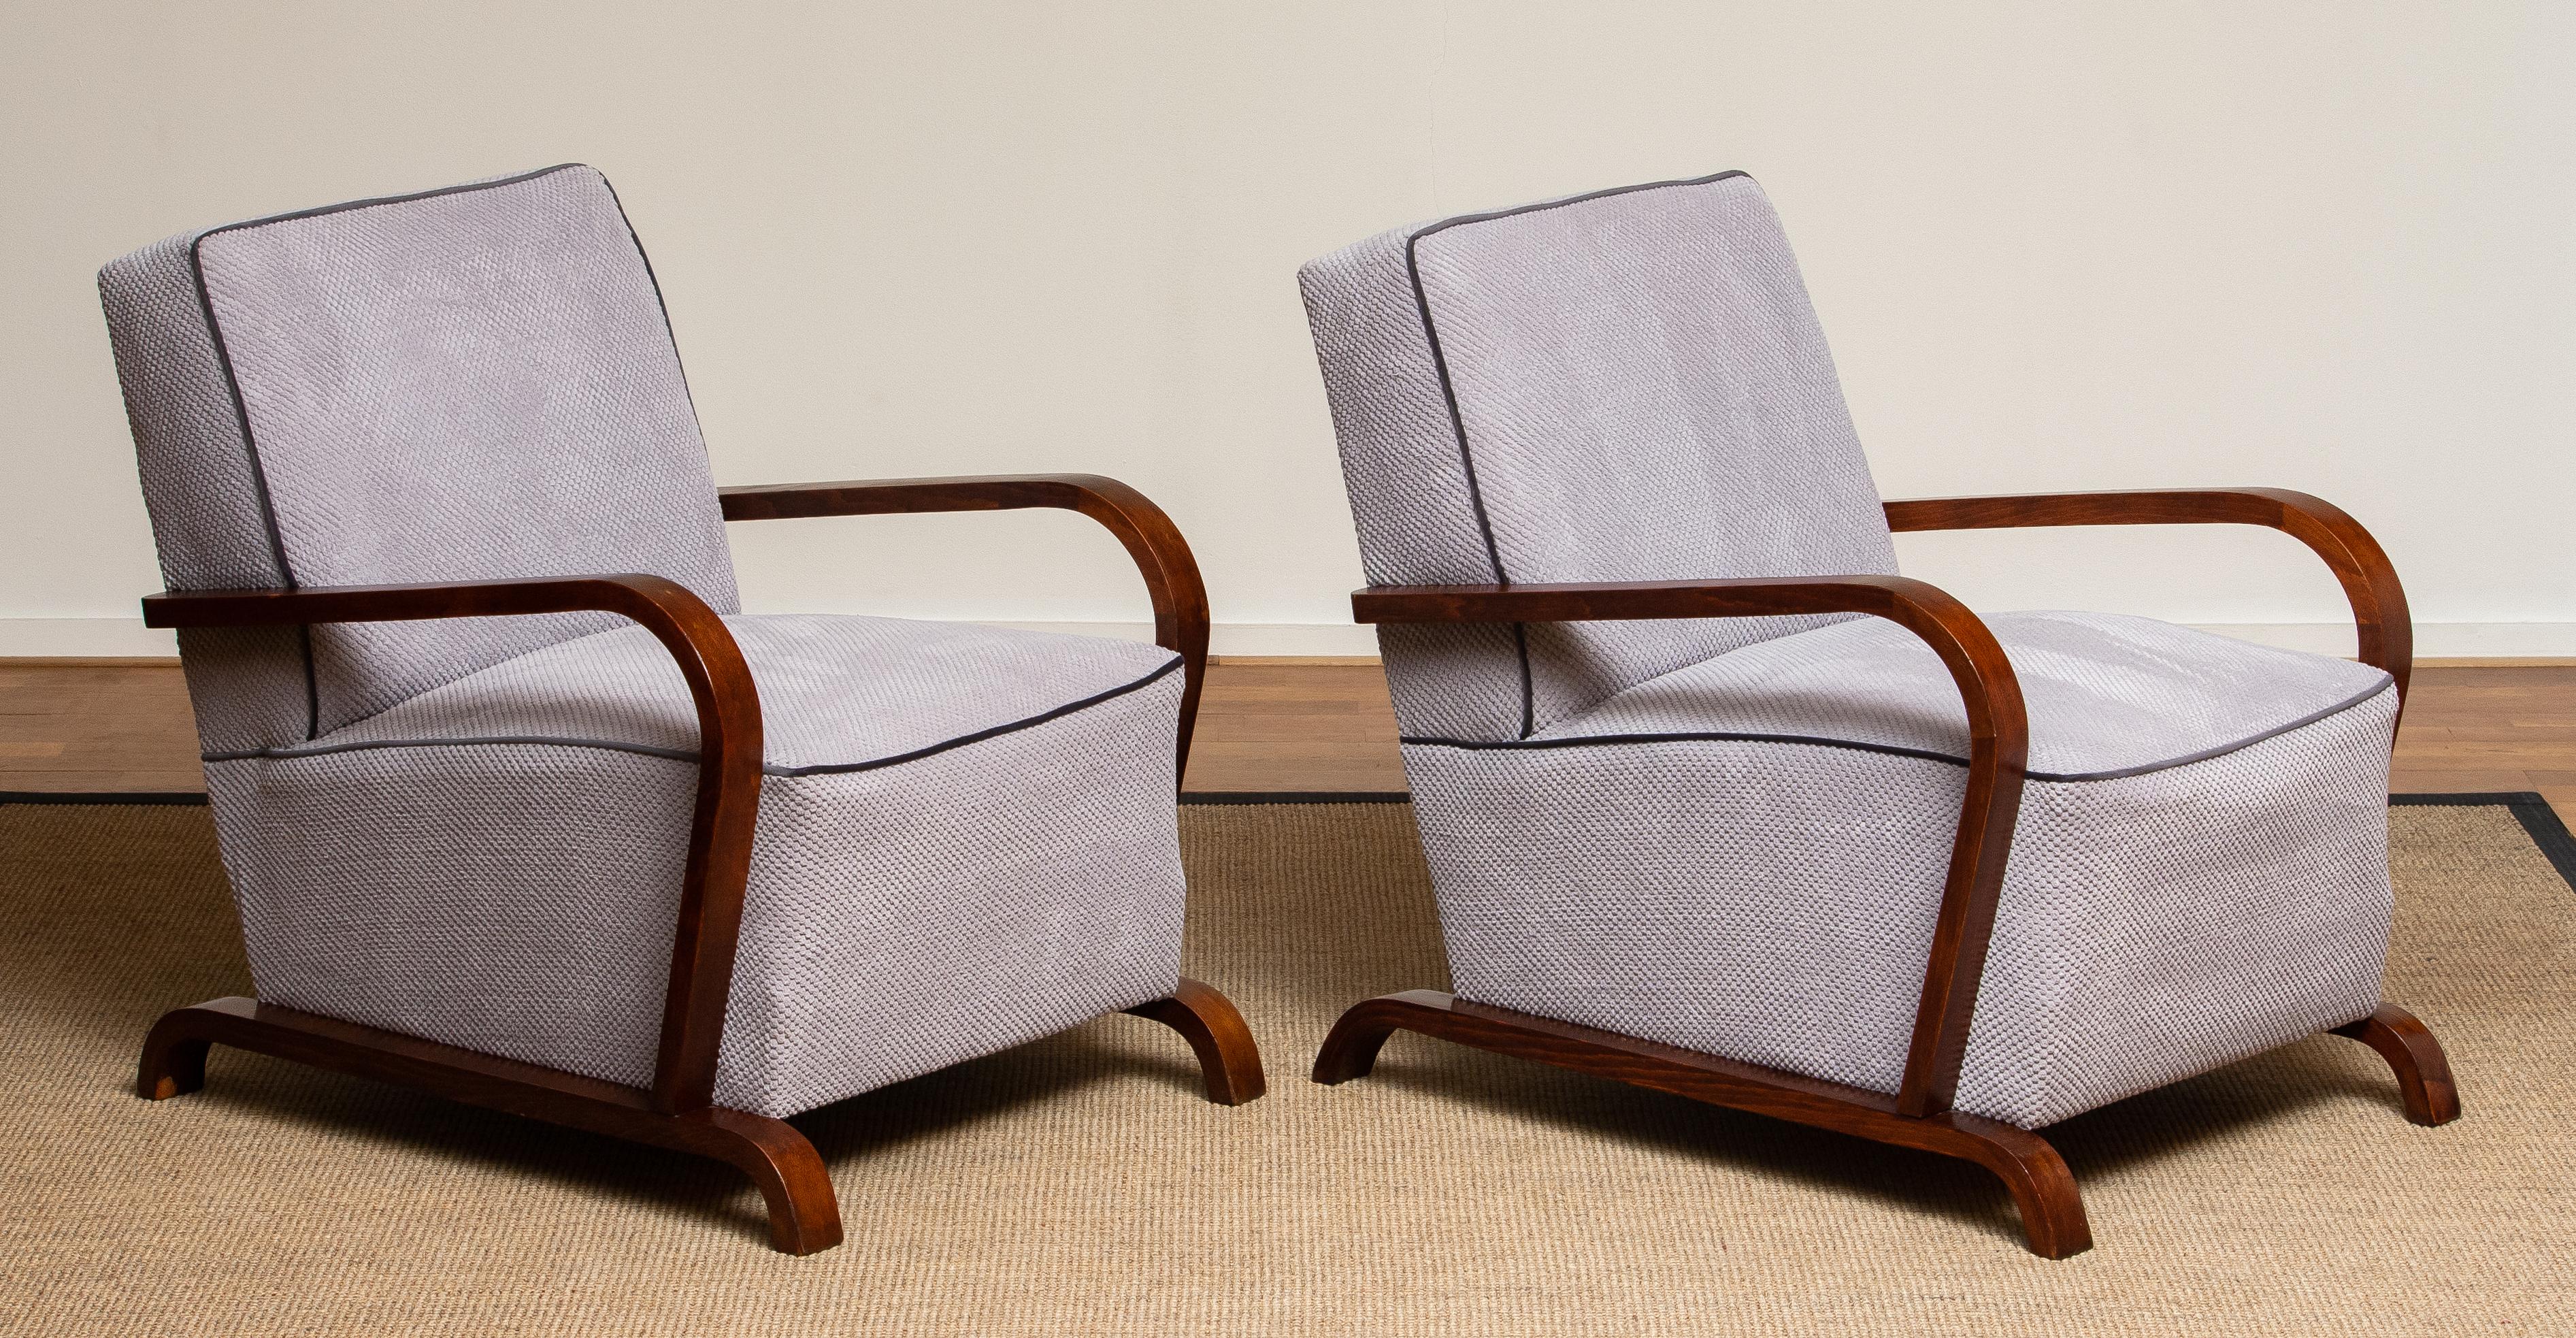 1920s, Pair of Scandinavian Art Deco Armchair / Lounge / Club Chairs from Sweden 3